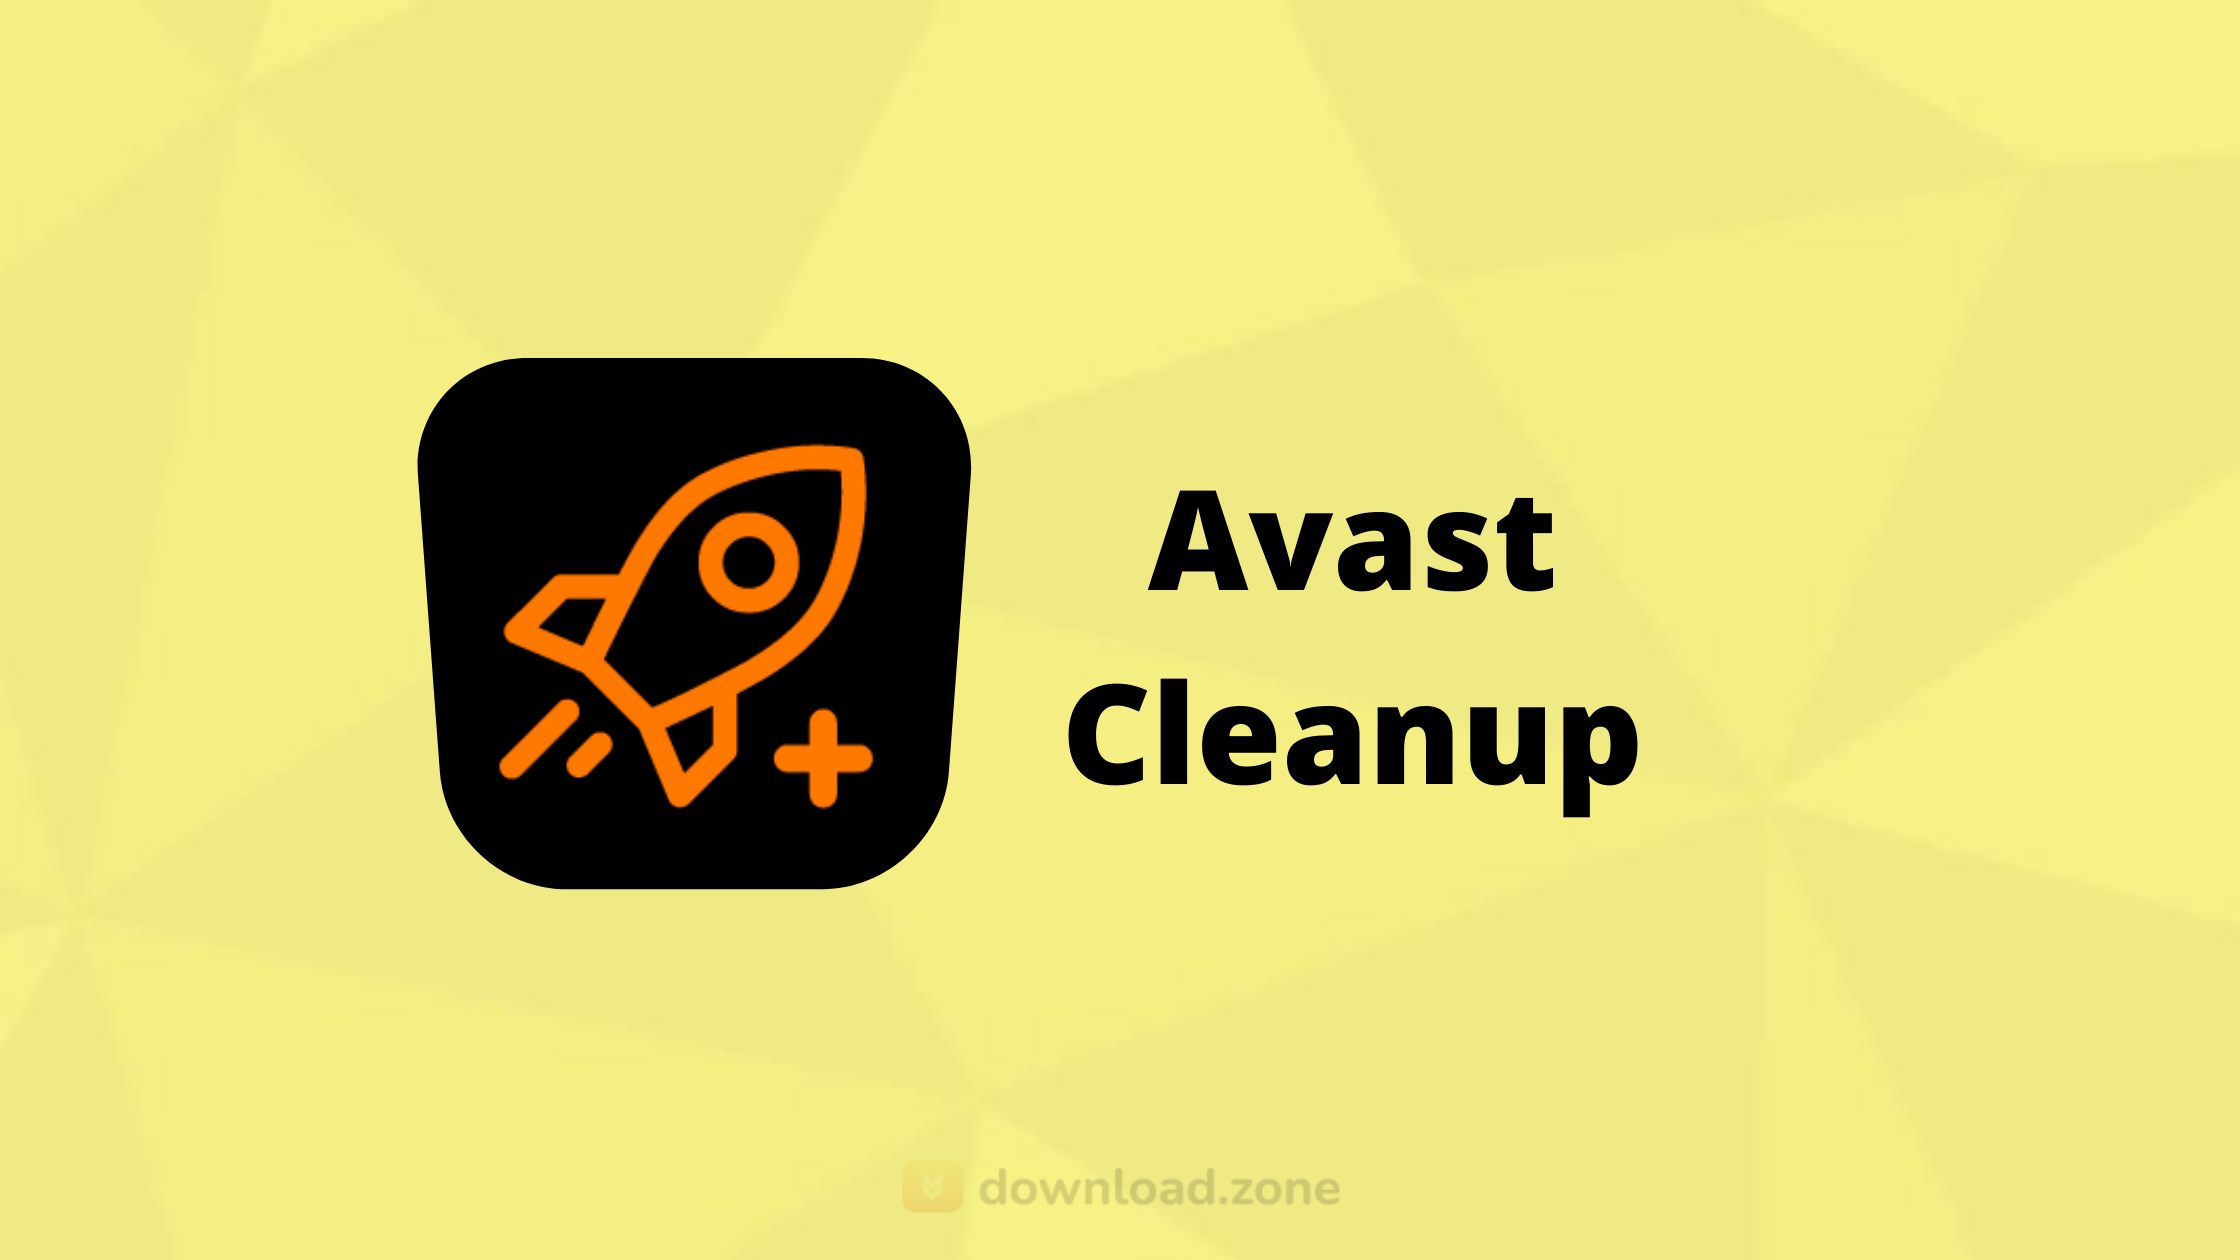 download avast cleanup with key latest verion